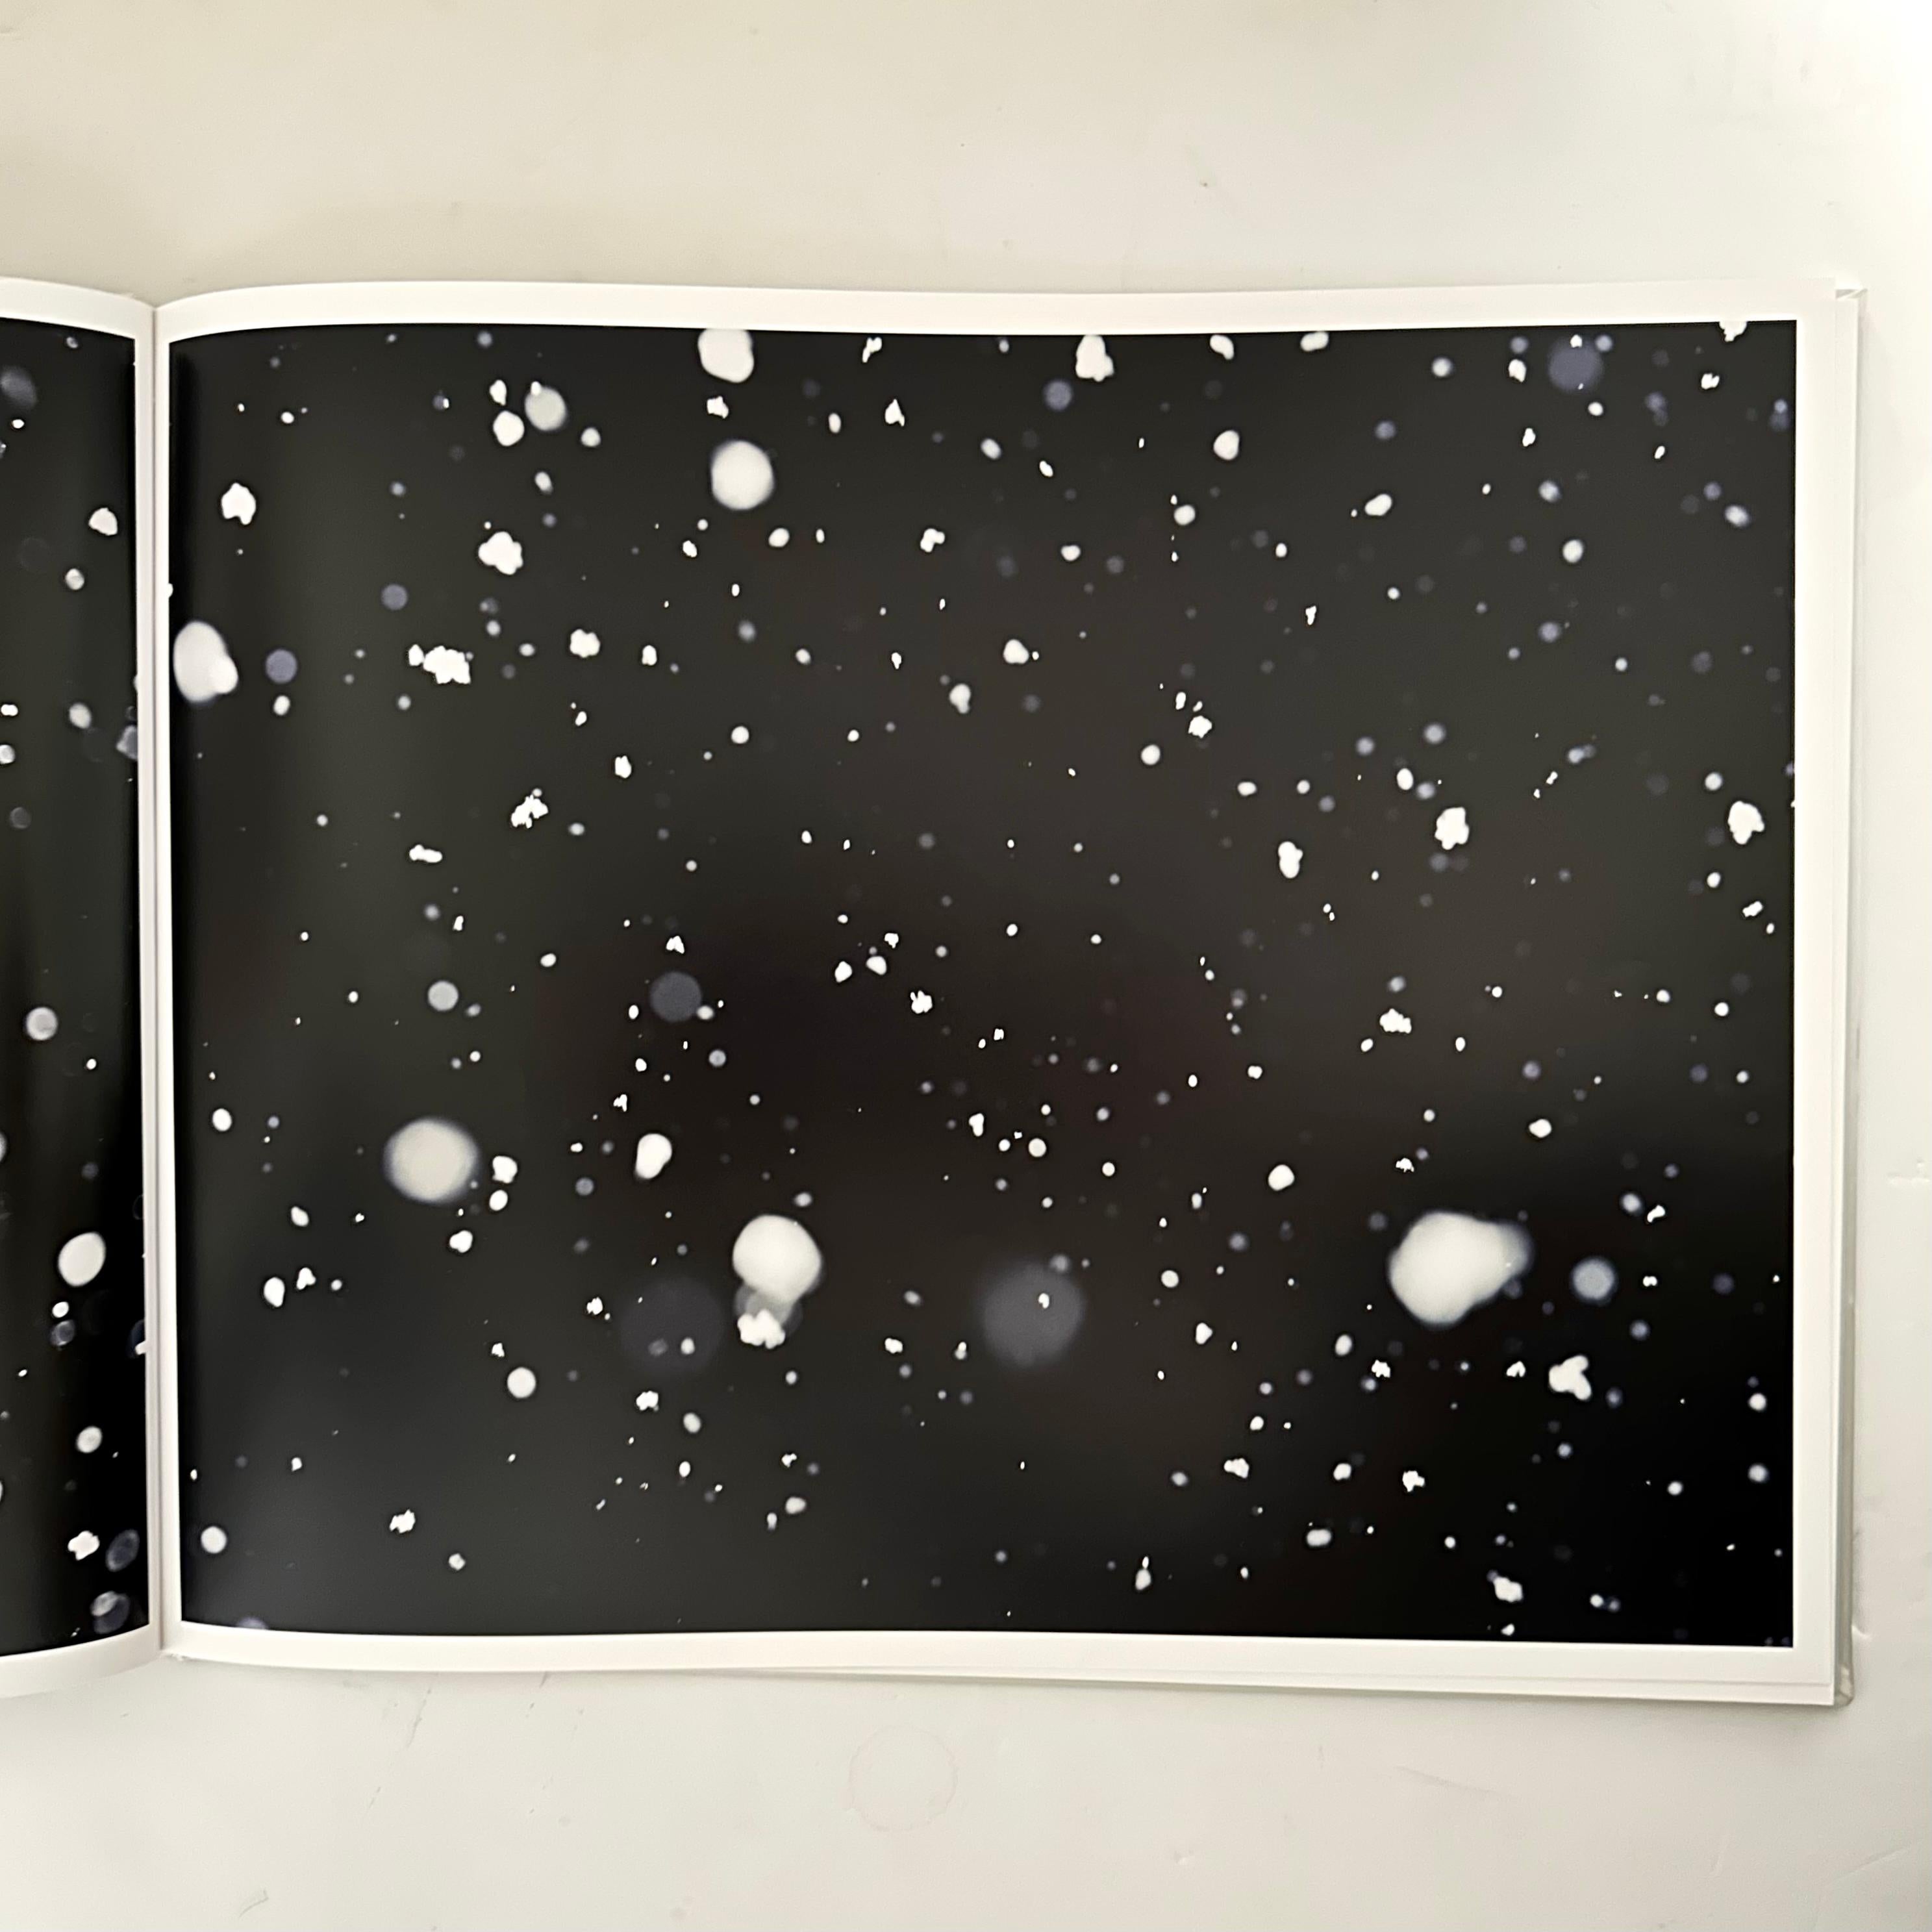 Published by Nazraelli Press, 1st edition, limited to only 500 copies, Portland, 2008. Large oblong Hardcover in snow-white silk-covered boards. 

Suzuki is one of Japan’s most prominent photographers. He has been working on quintessential Japanese